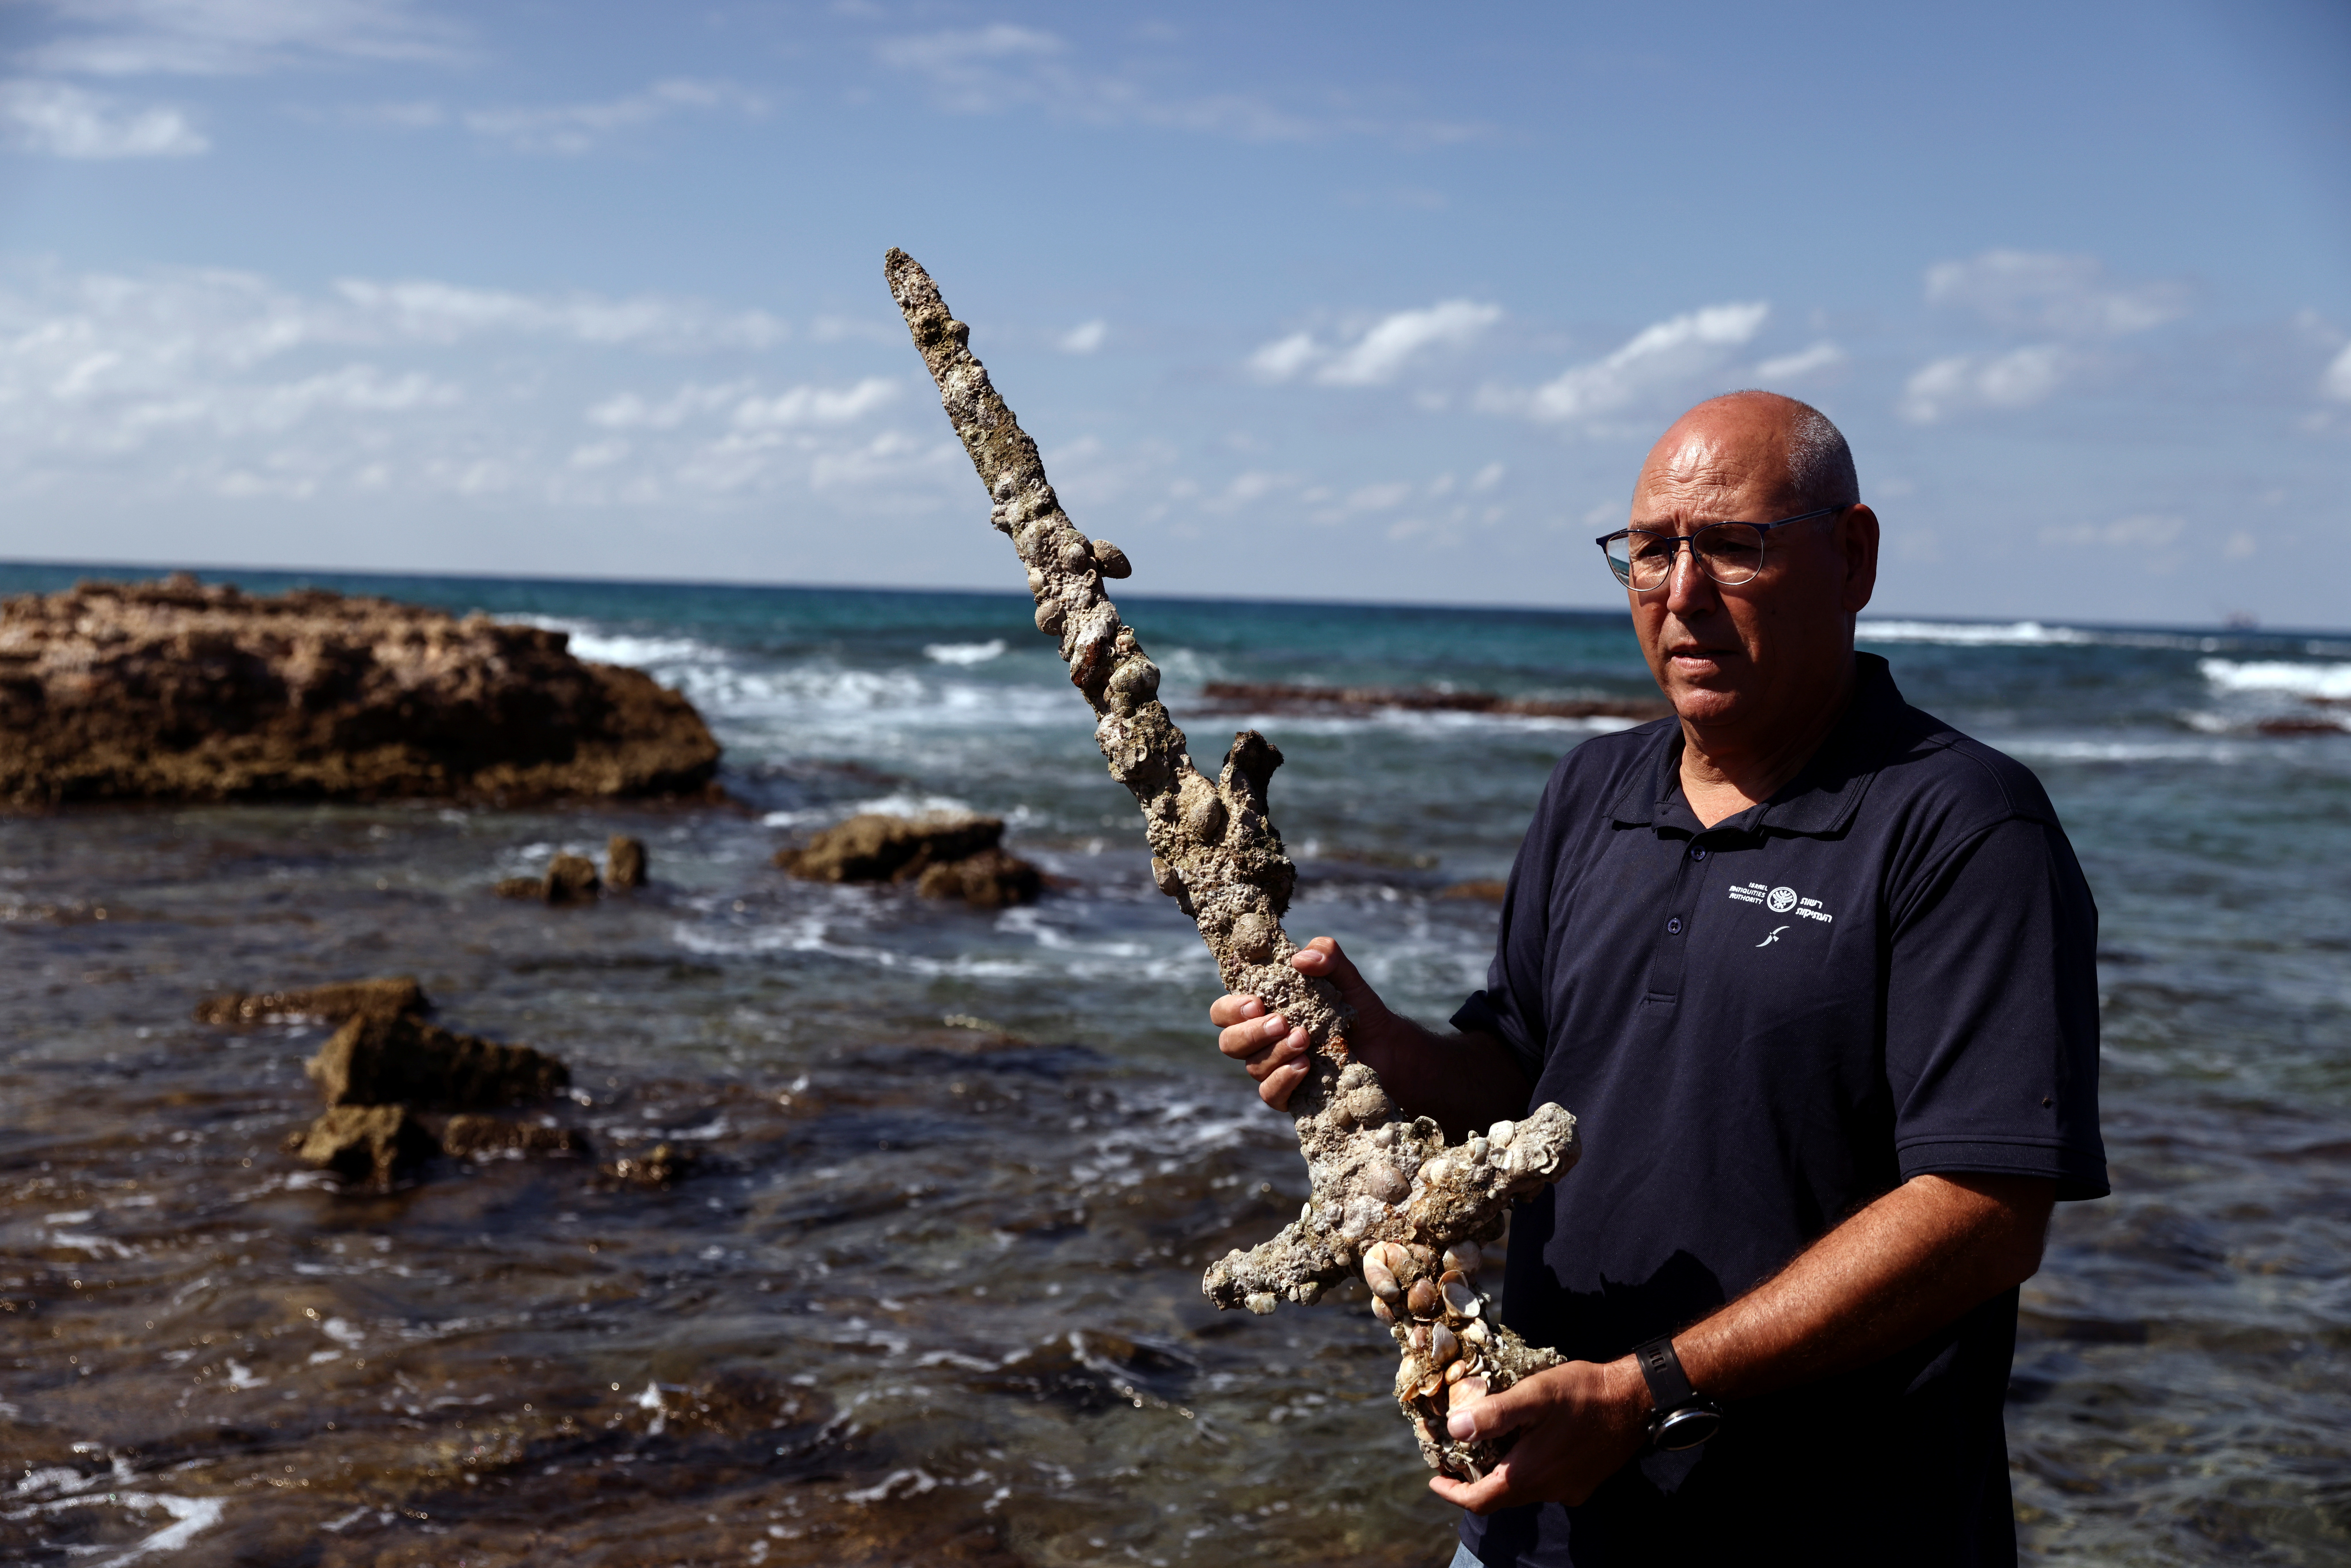 A sword believed to have belonged to a Crusader who sailed to the Holy Land almost a millennium ago was found in Caesarea